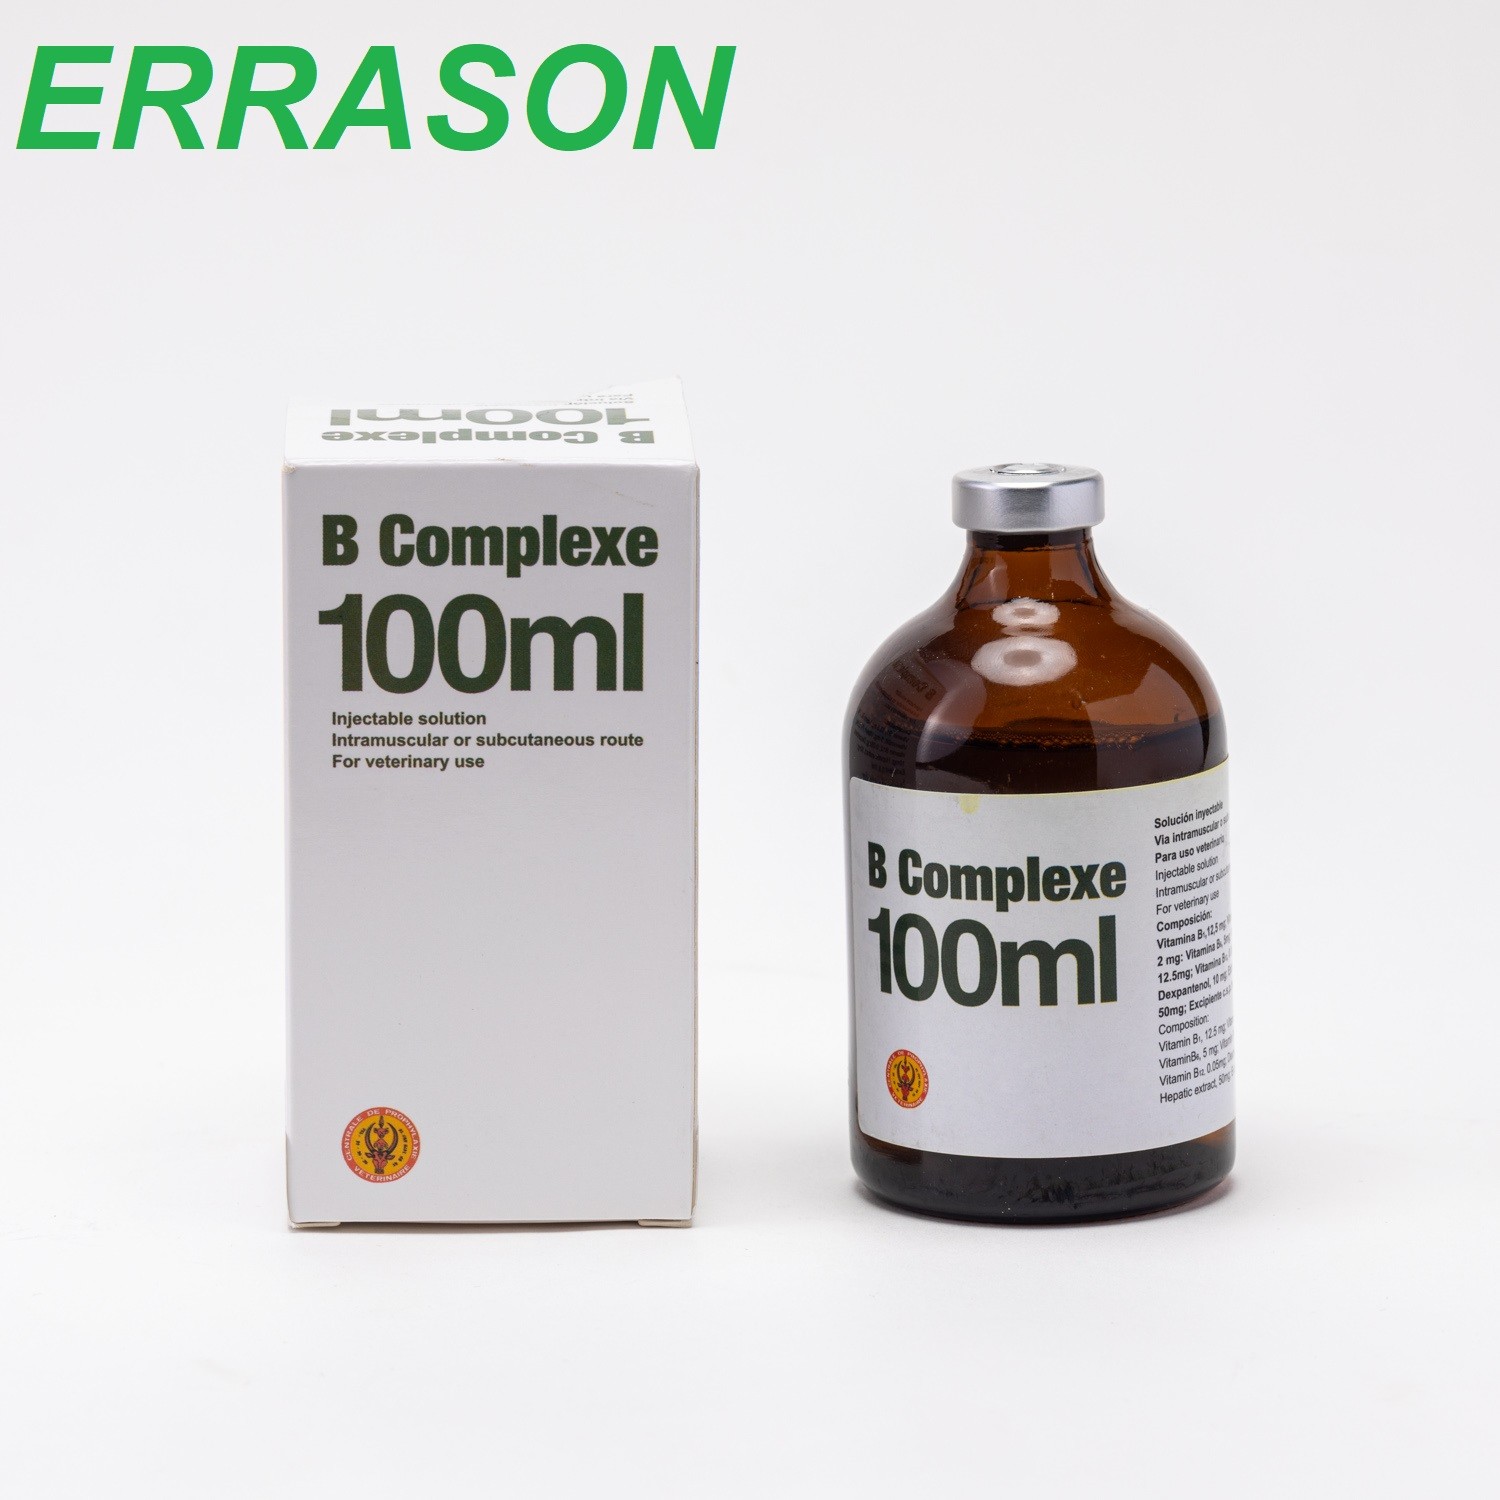 Vitamin B complexe injection 100ml